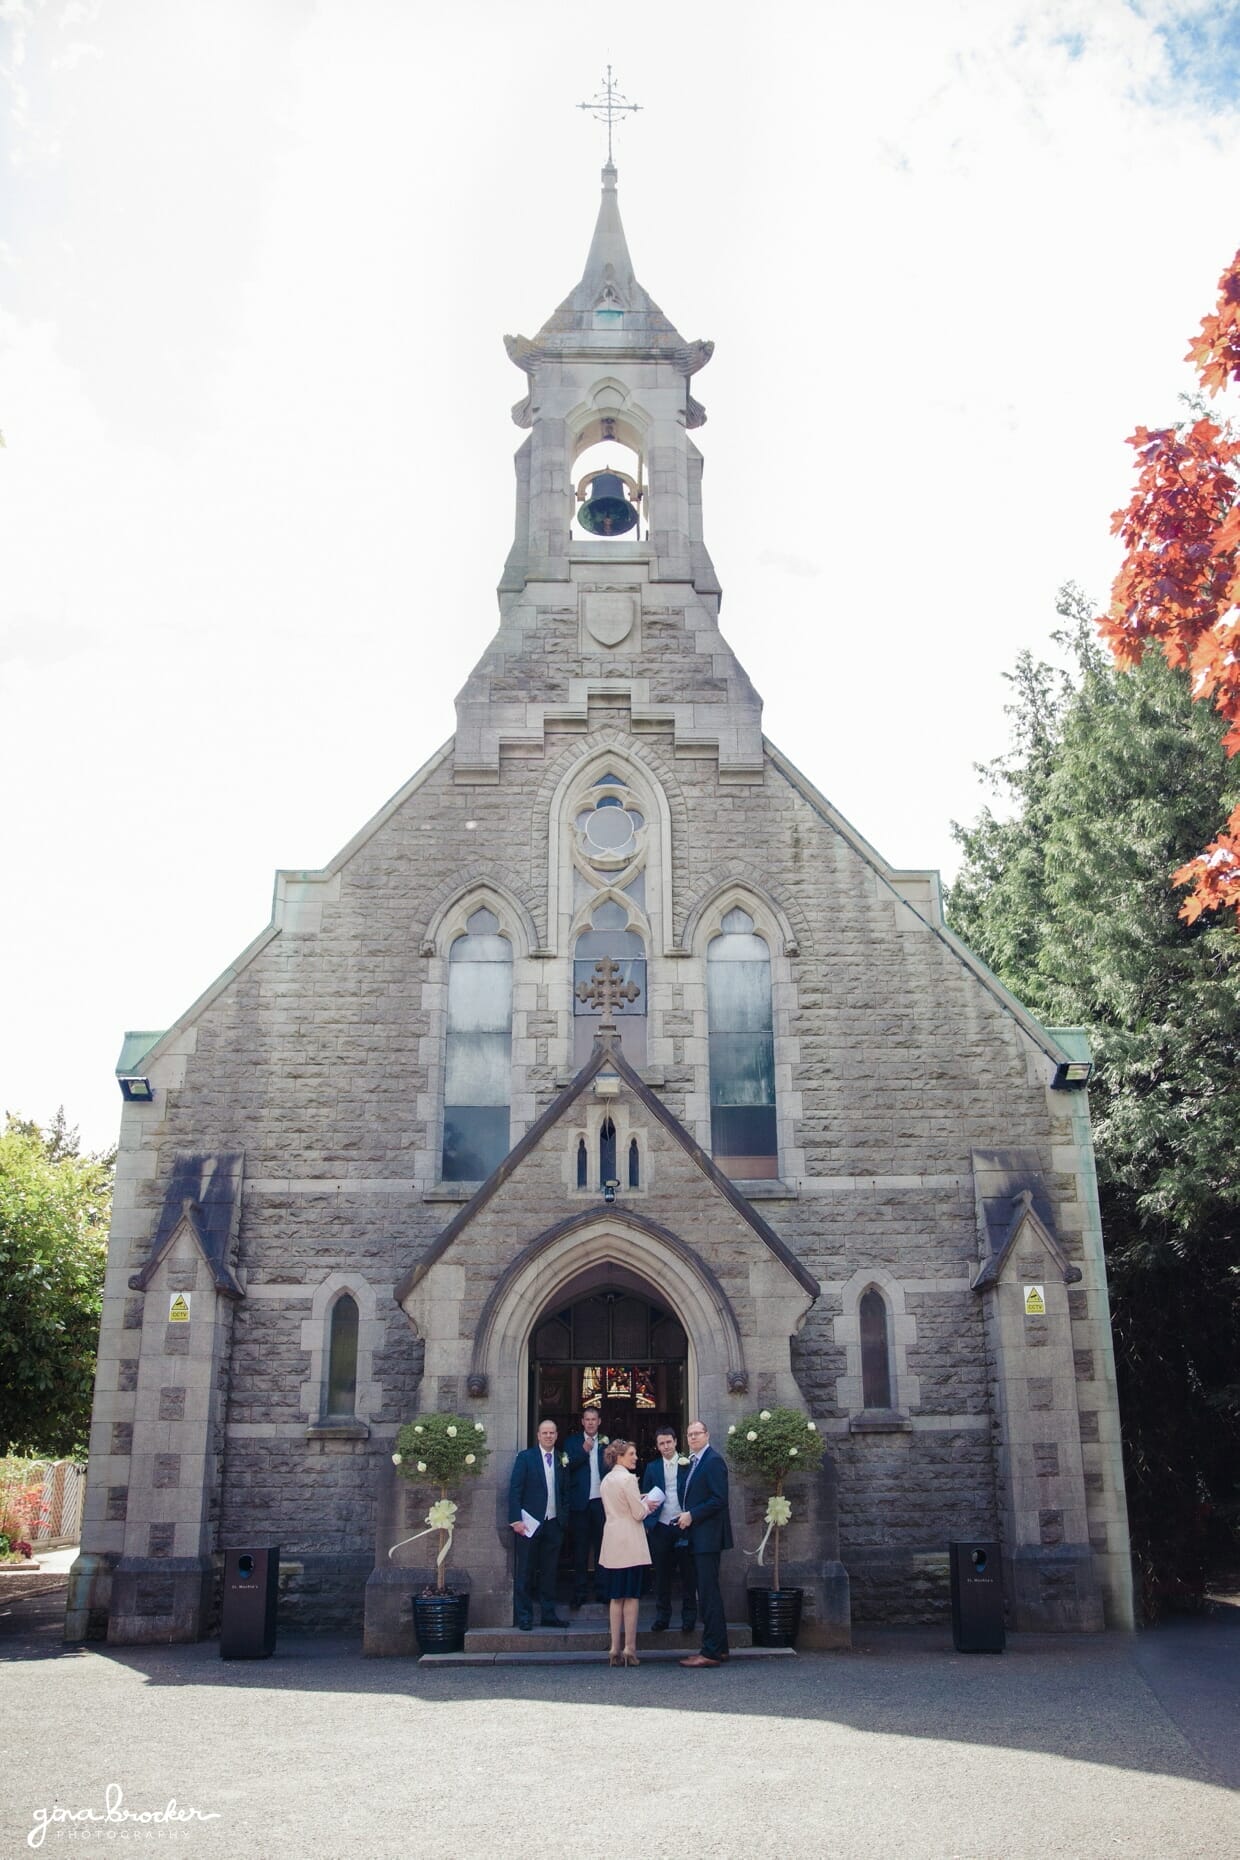 The groom greets guests as the arrive to a small and quaint church for an intimate wedding ceremony